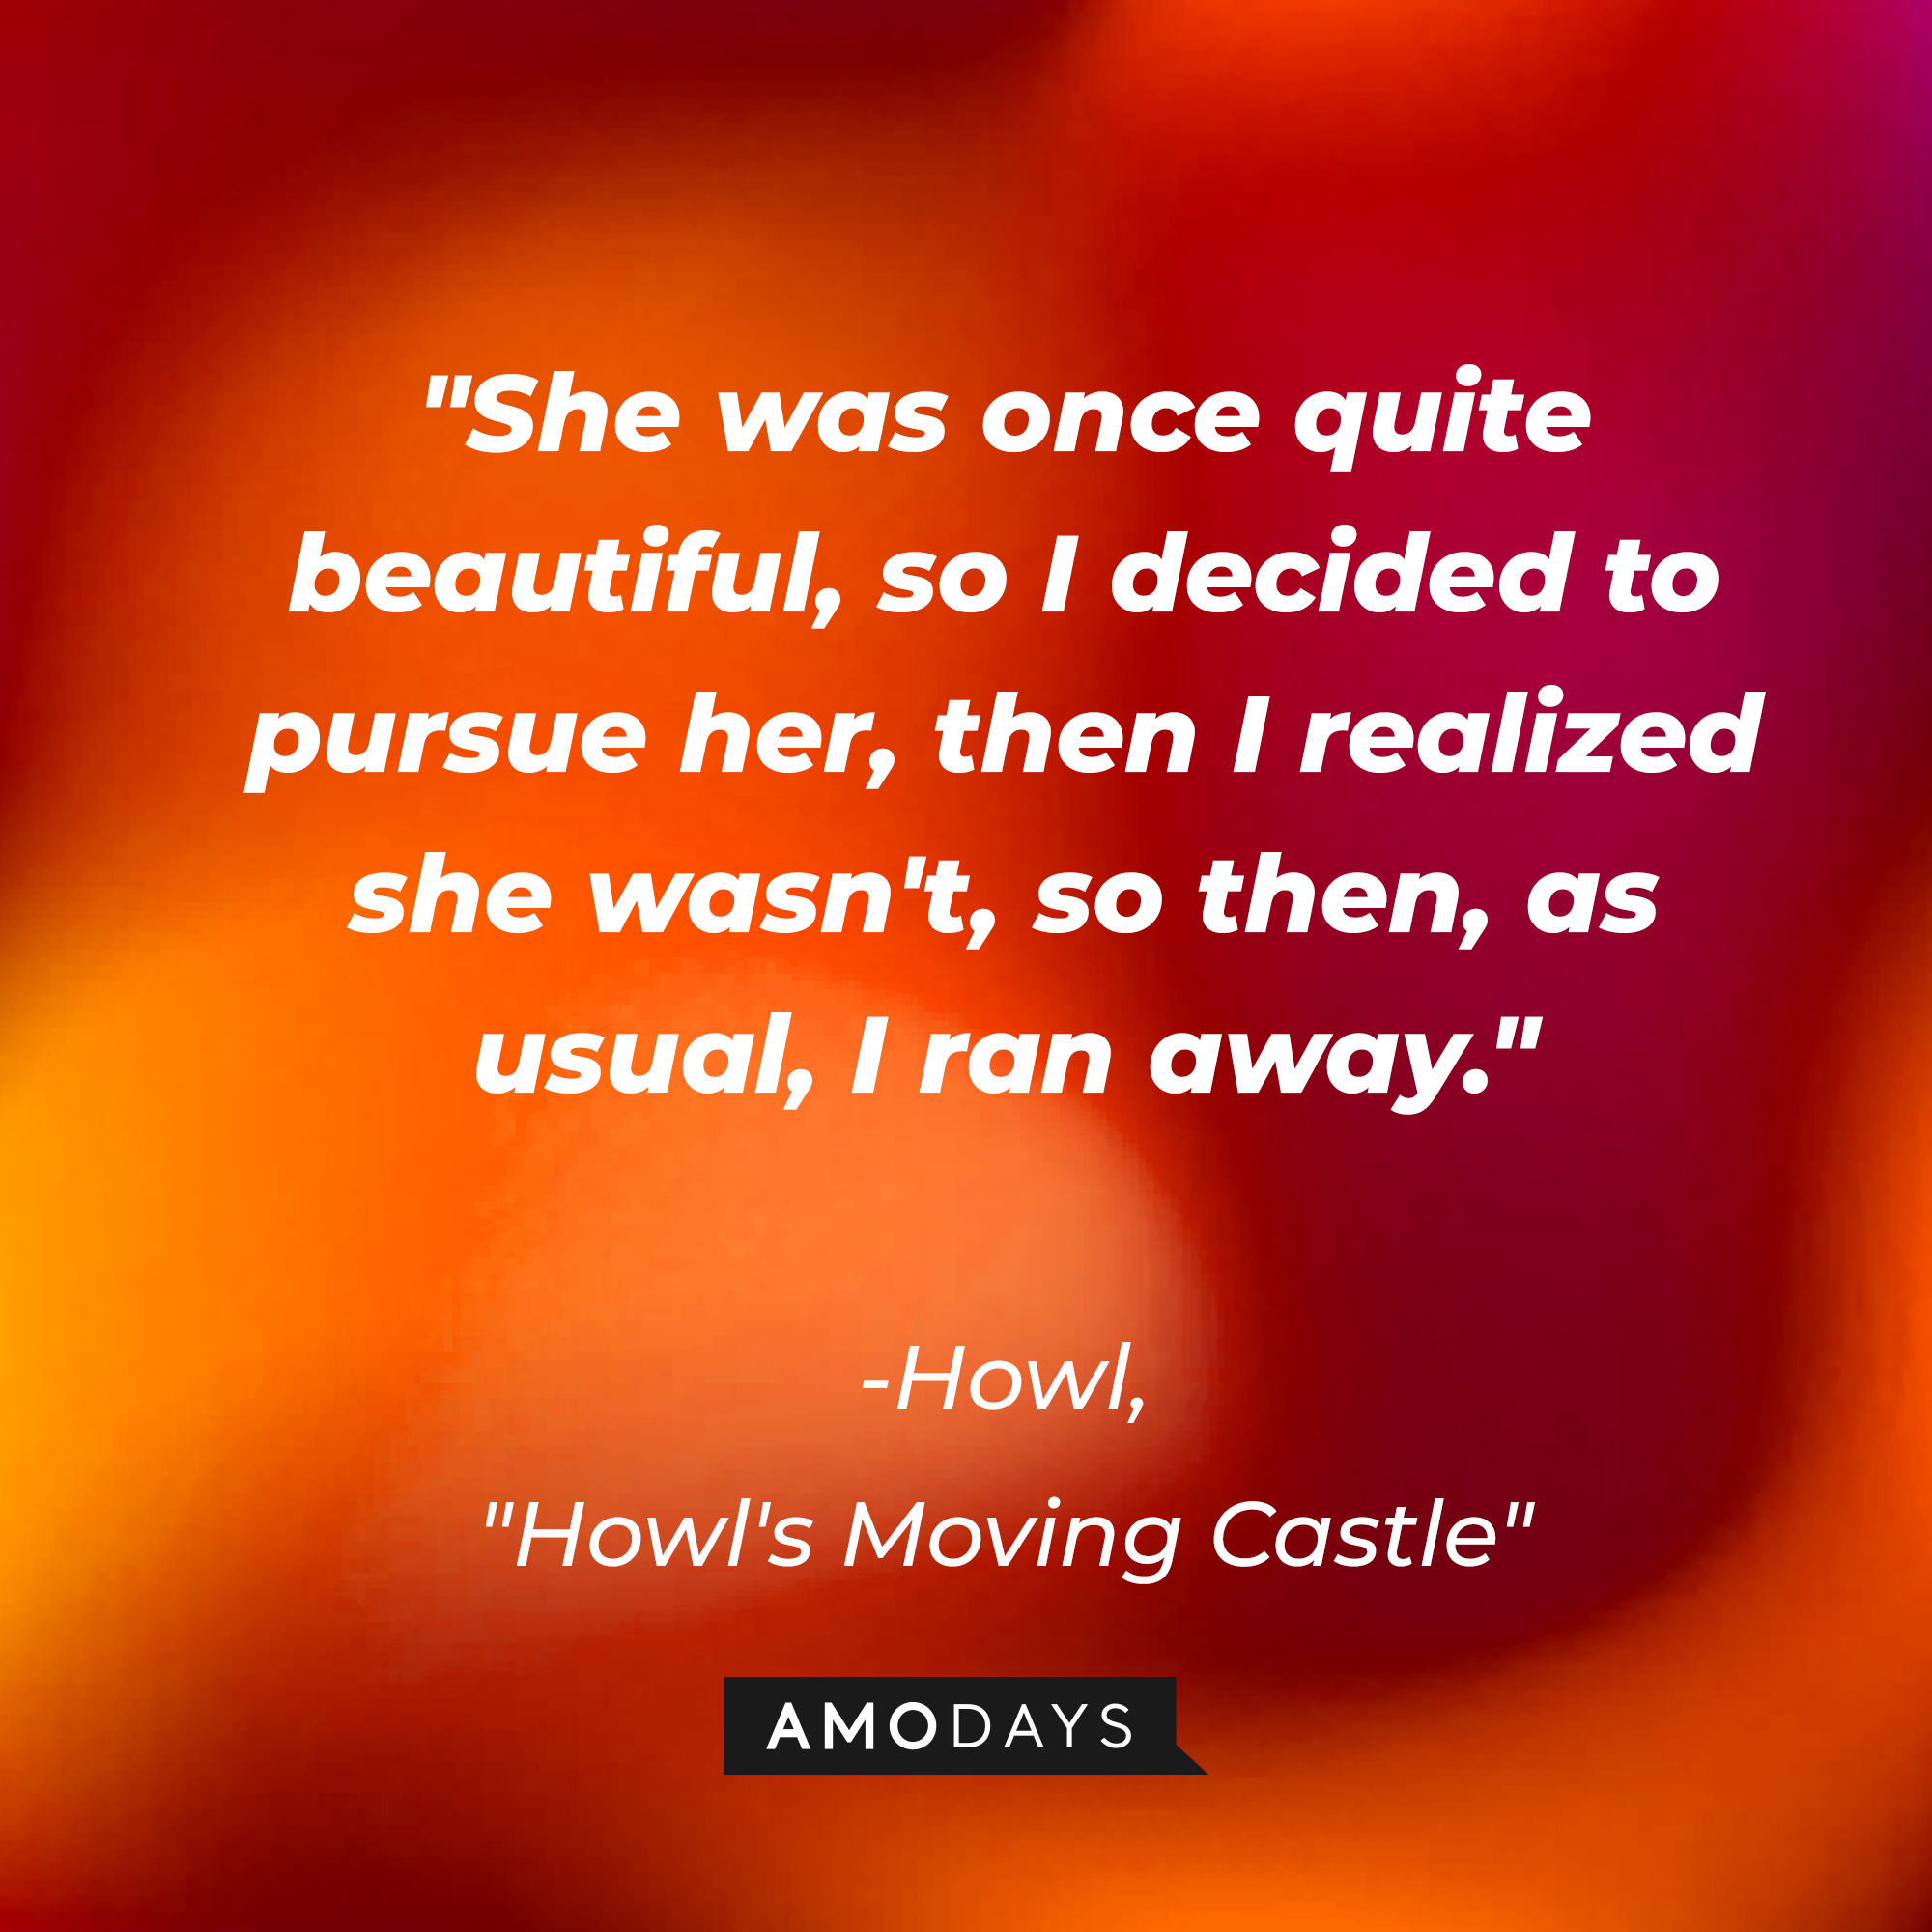 Howl's quote in "Howl's Moving Castle:" "She was once quite beautiful, so I decided to pursue her, then I realized she wasn't, so then, as usual, I ran away." | Source: AmoDays